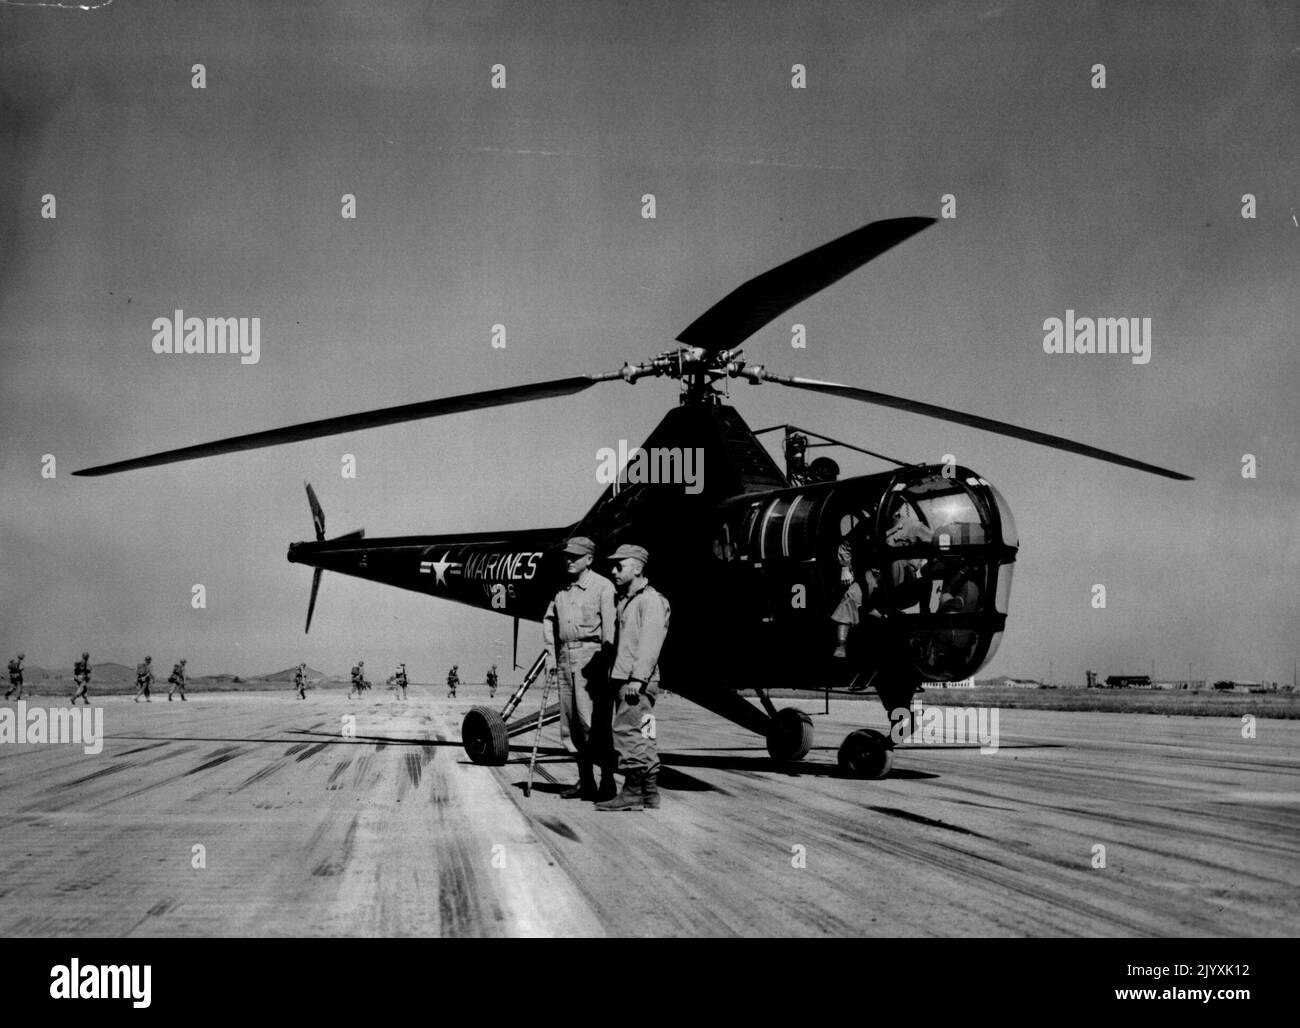 Helicopters General - Aviation. September 25, 1950. Stock Photo